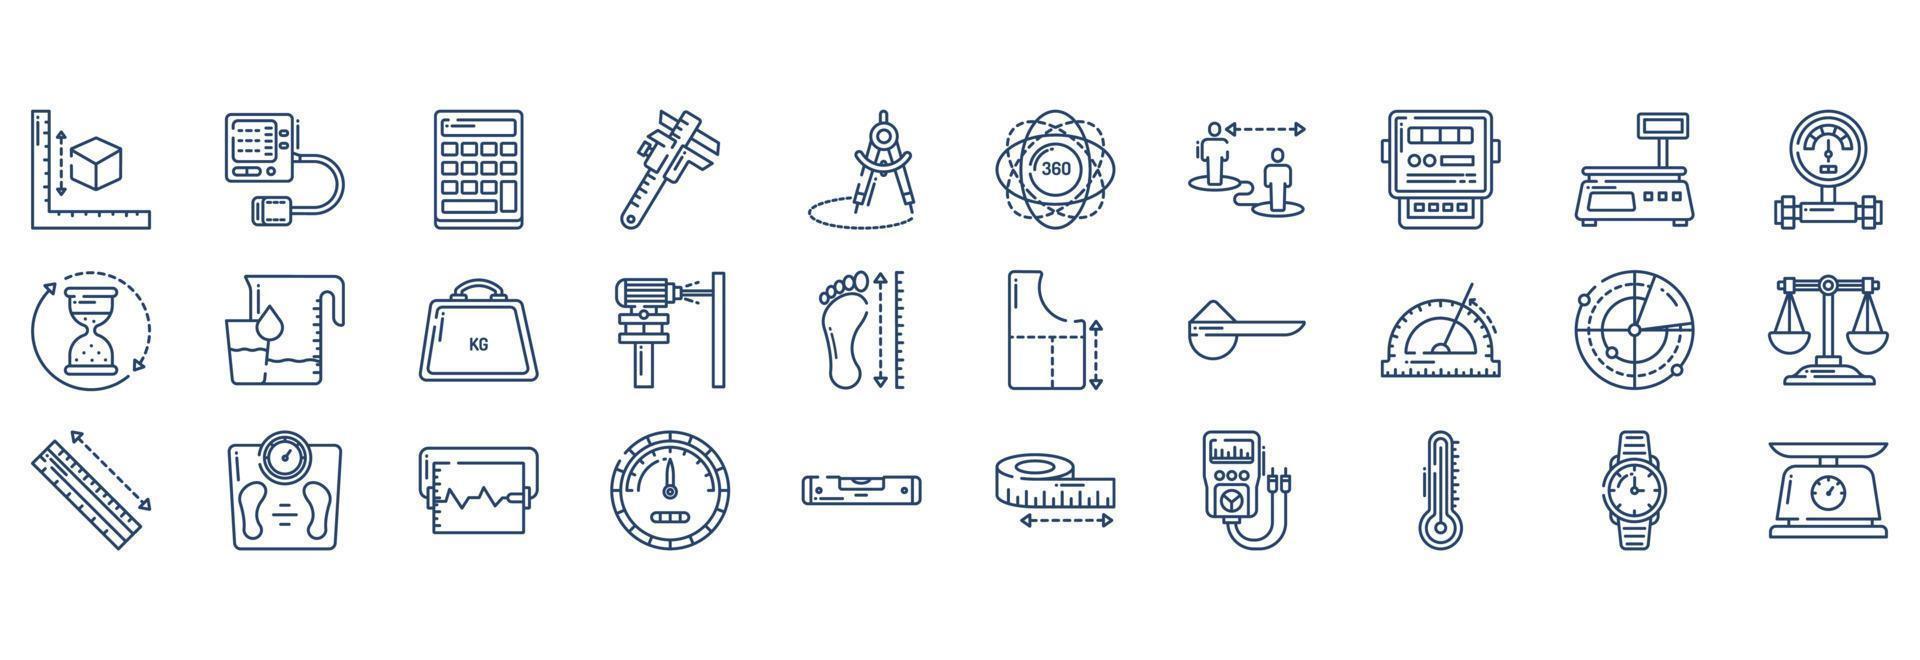 Collection of icons related to Measurements, including icons like Calculator, Caliper, Compass, Degree and more. vector illustrations, Pixel Perfect set